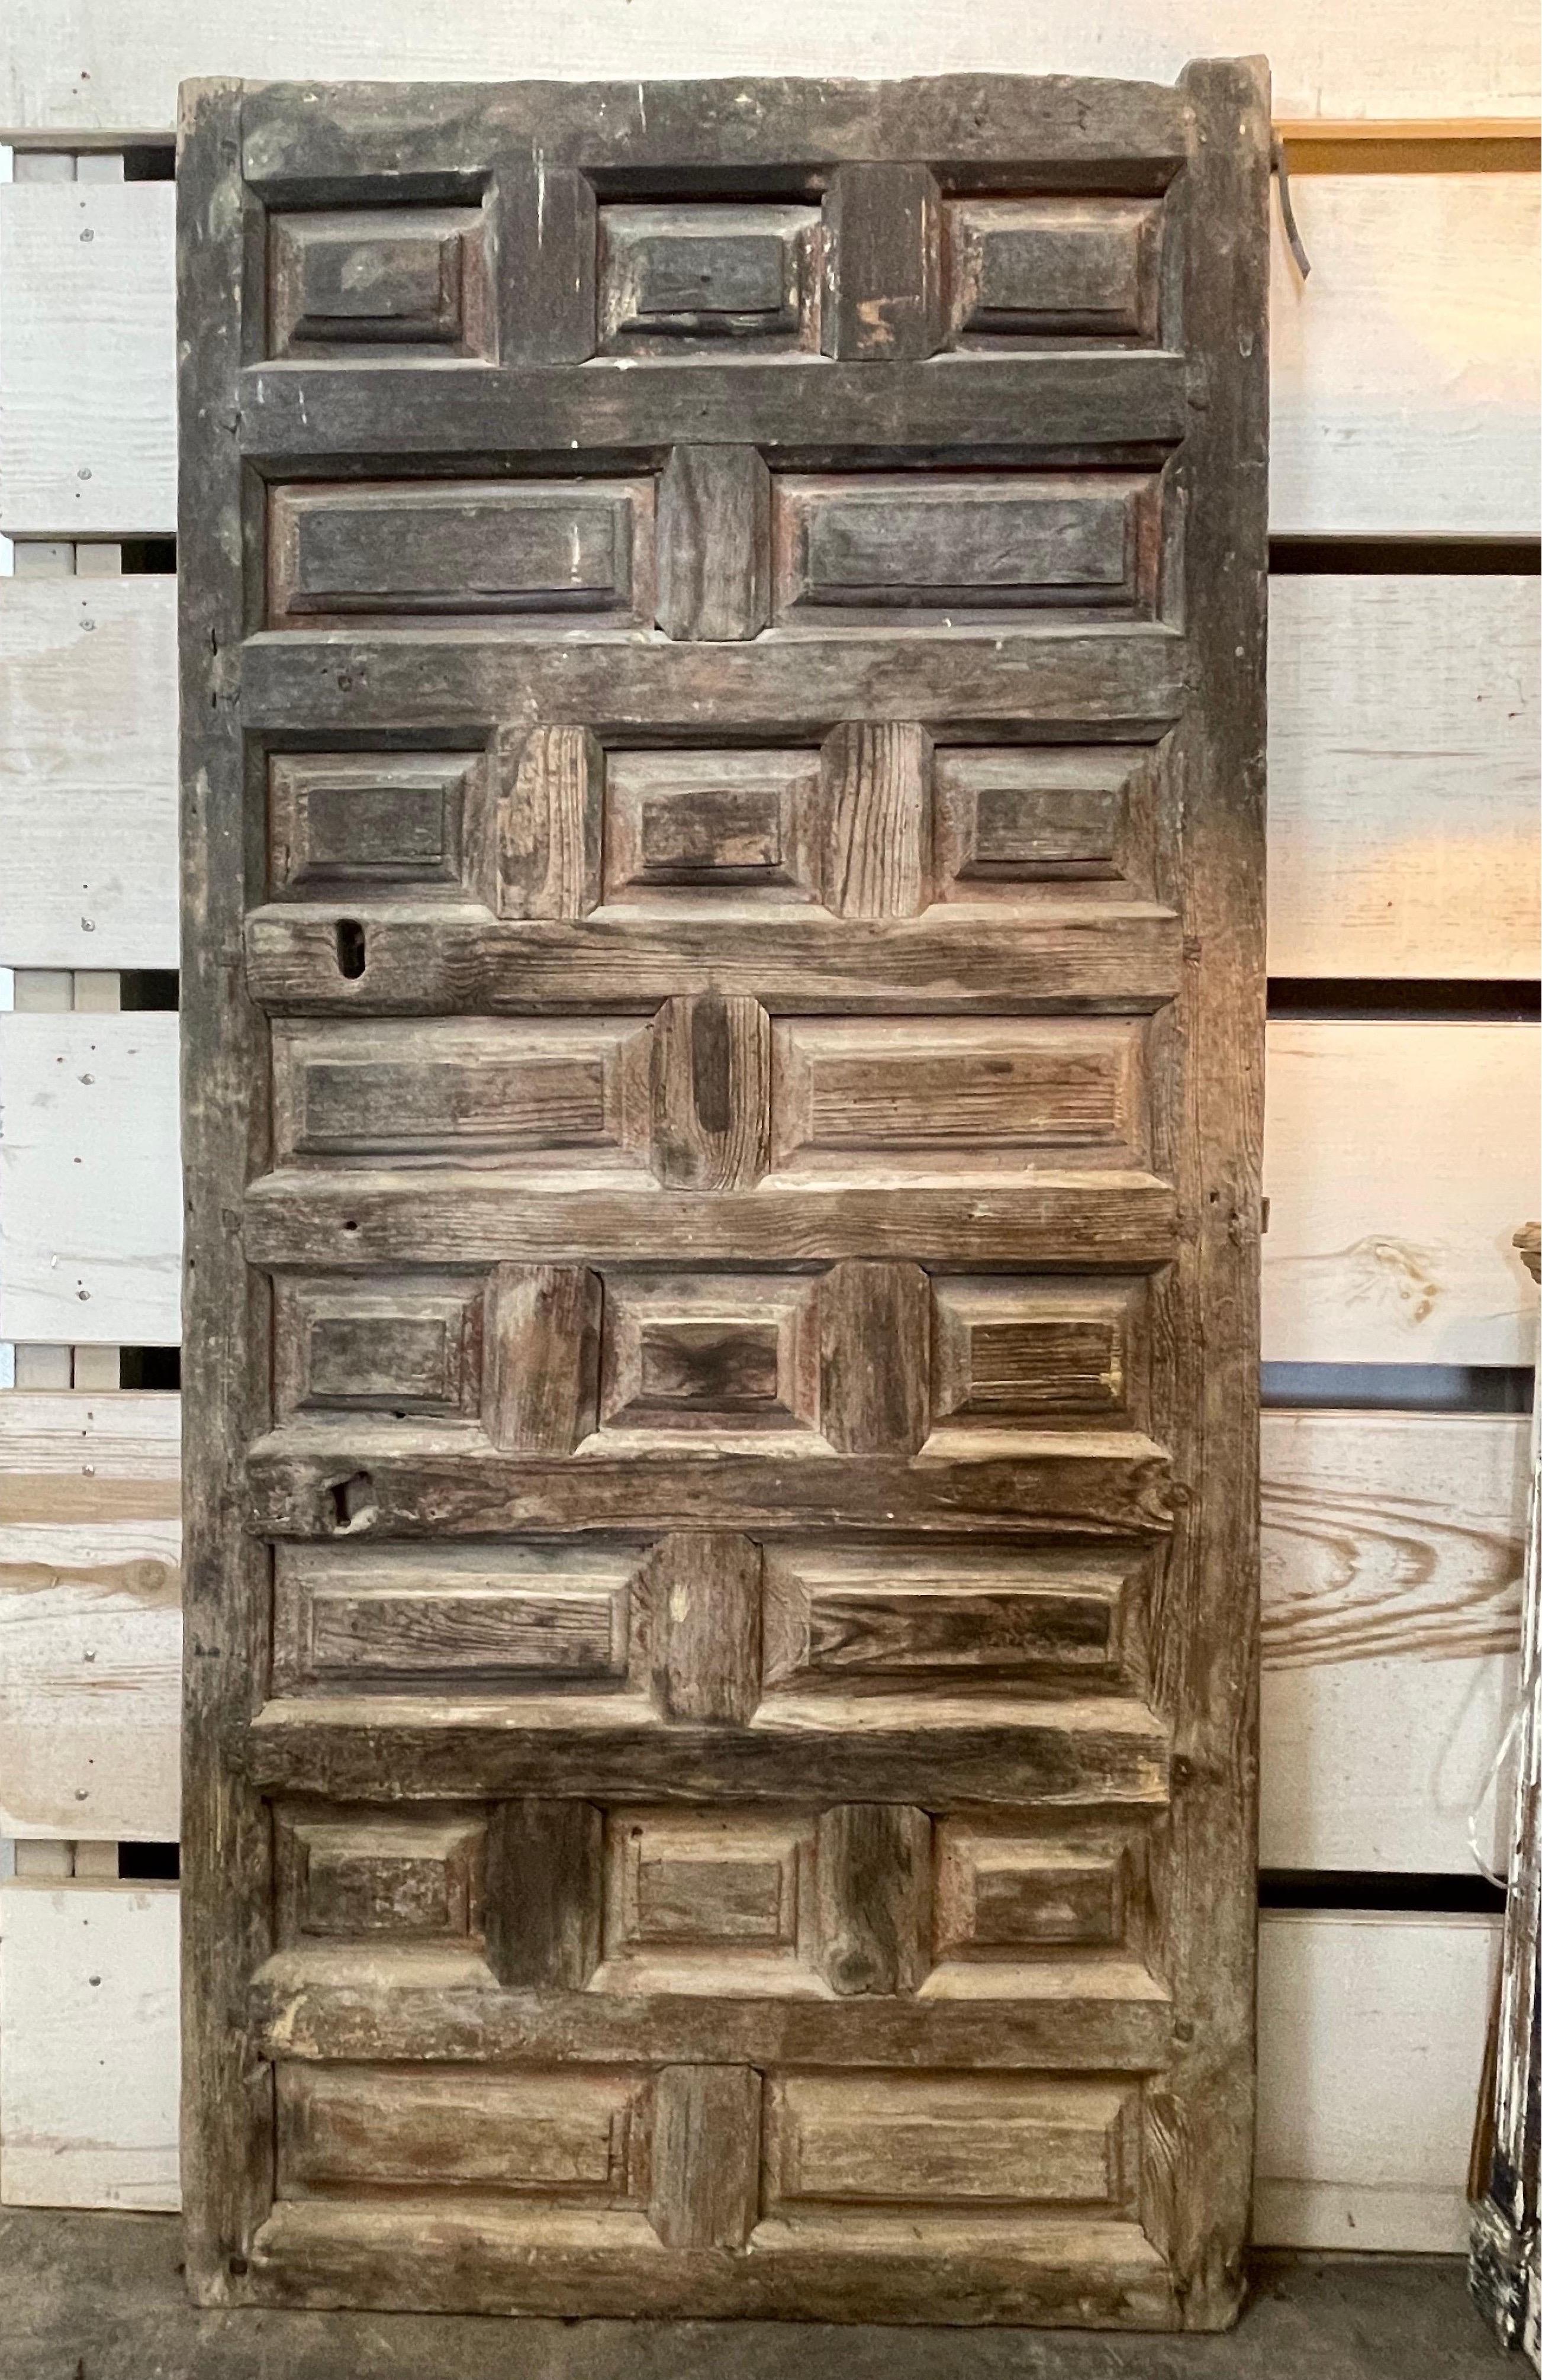 This early Spanish door has remnants of orange paint and shows pegging throughout the door. The wood is the typical Chestnut used often for doors and rustic furniture. On the back is the iron is intact as well the iron that sets out the hinges. It’s